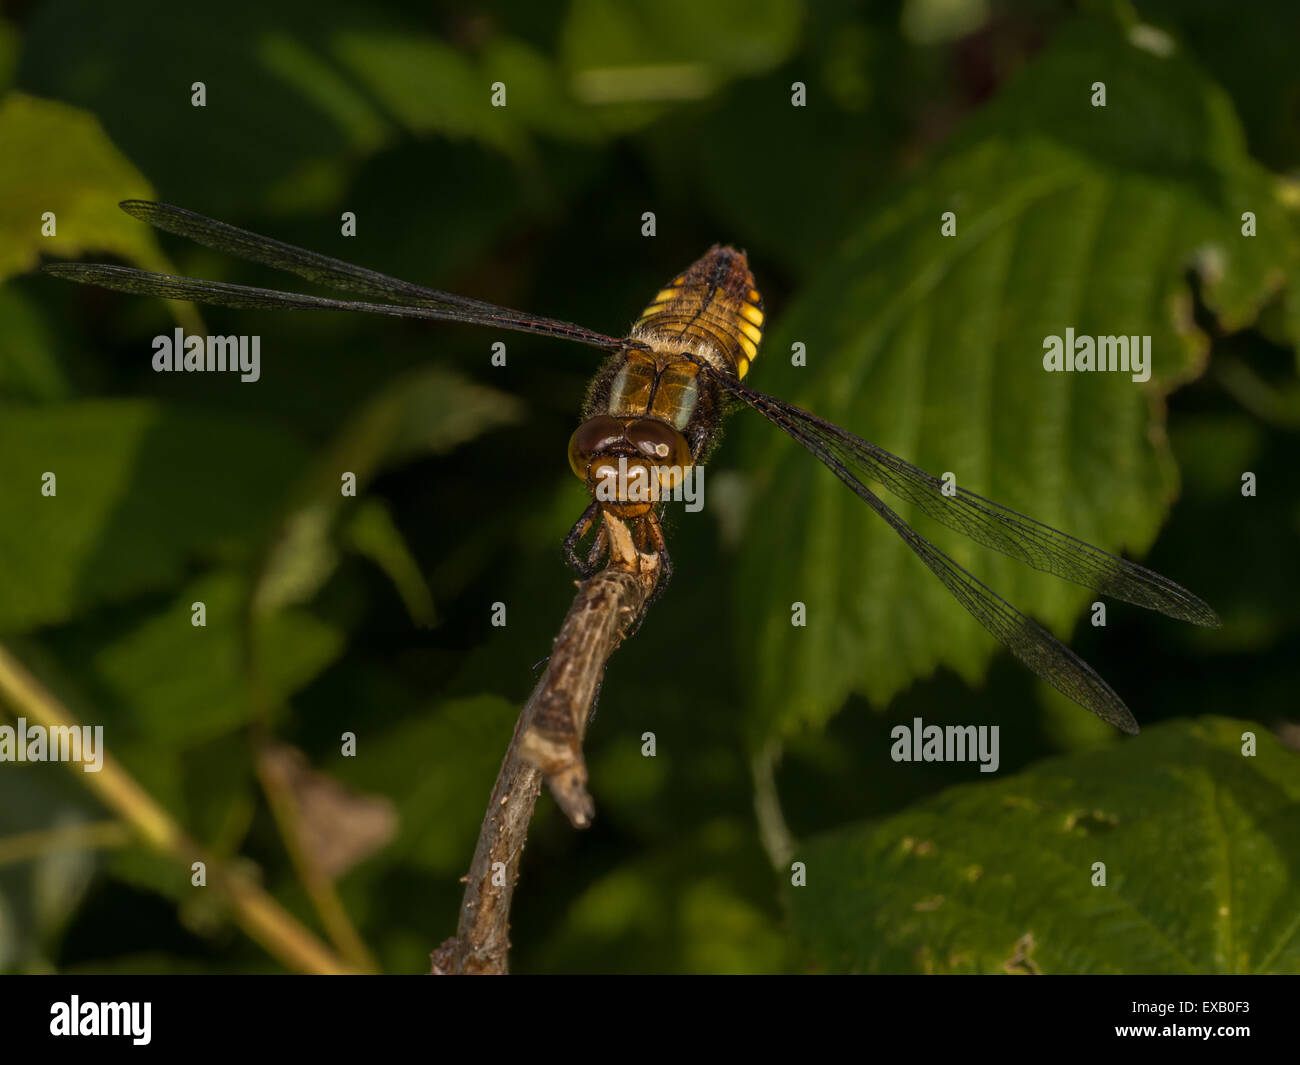 A beautiful dragonfly sat on a twig Stock Photo